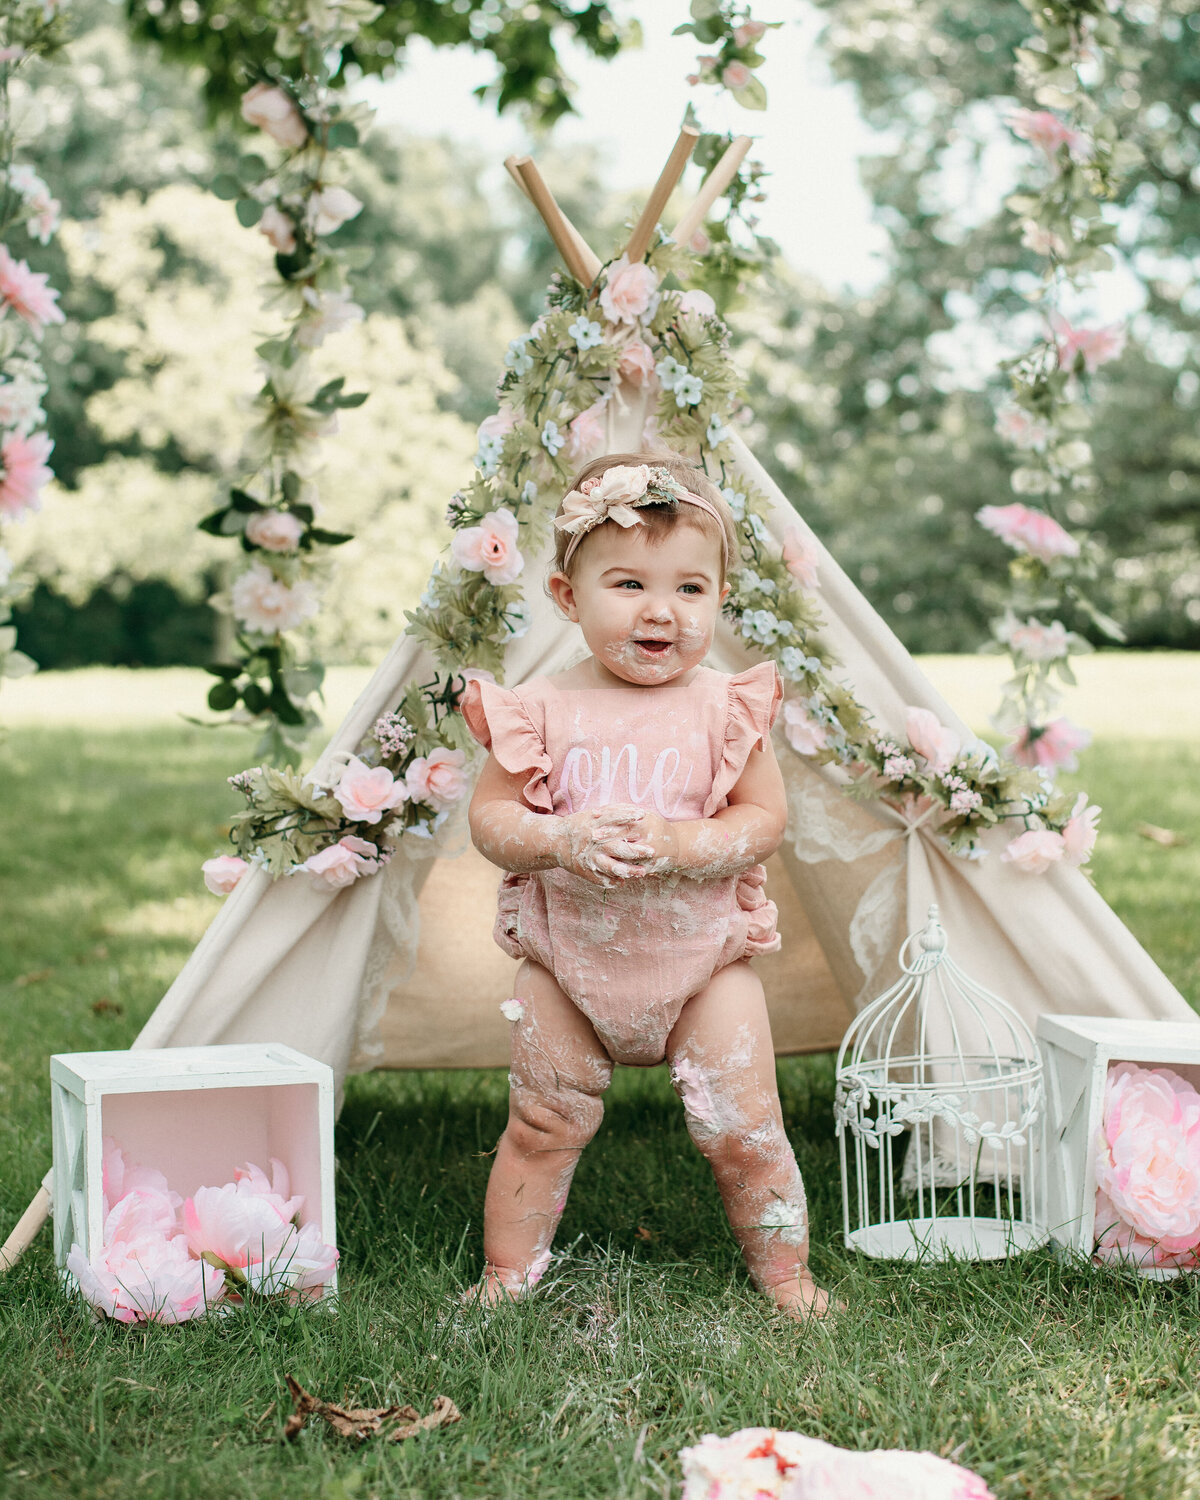 One year girl in pink ruffle sleeve romper standing in grass in front of floral tee pee with icing on her hands, feet and legs